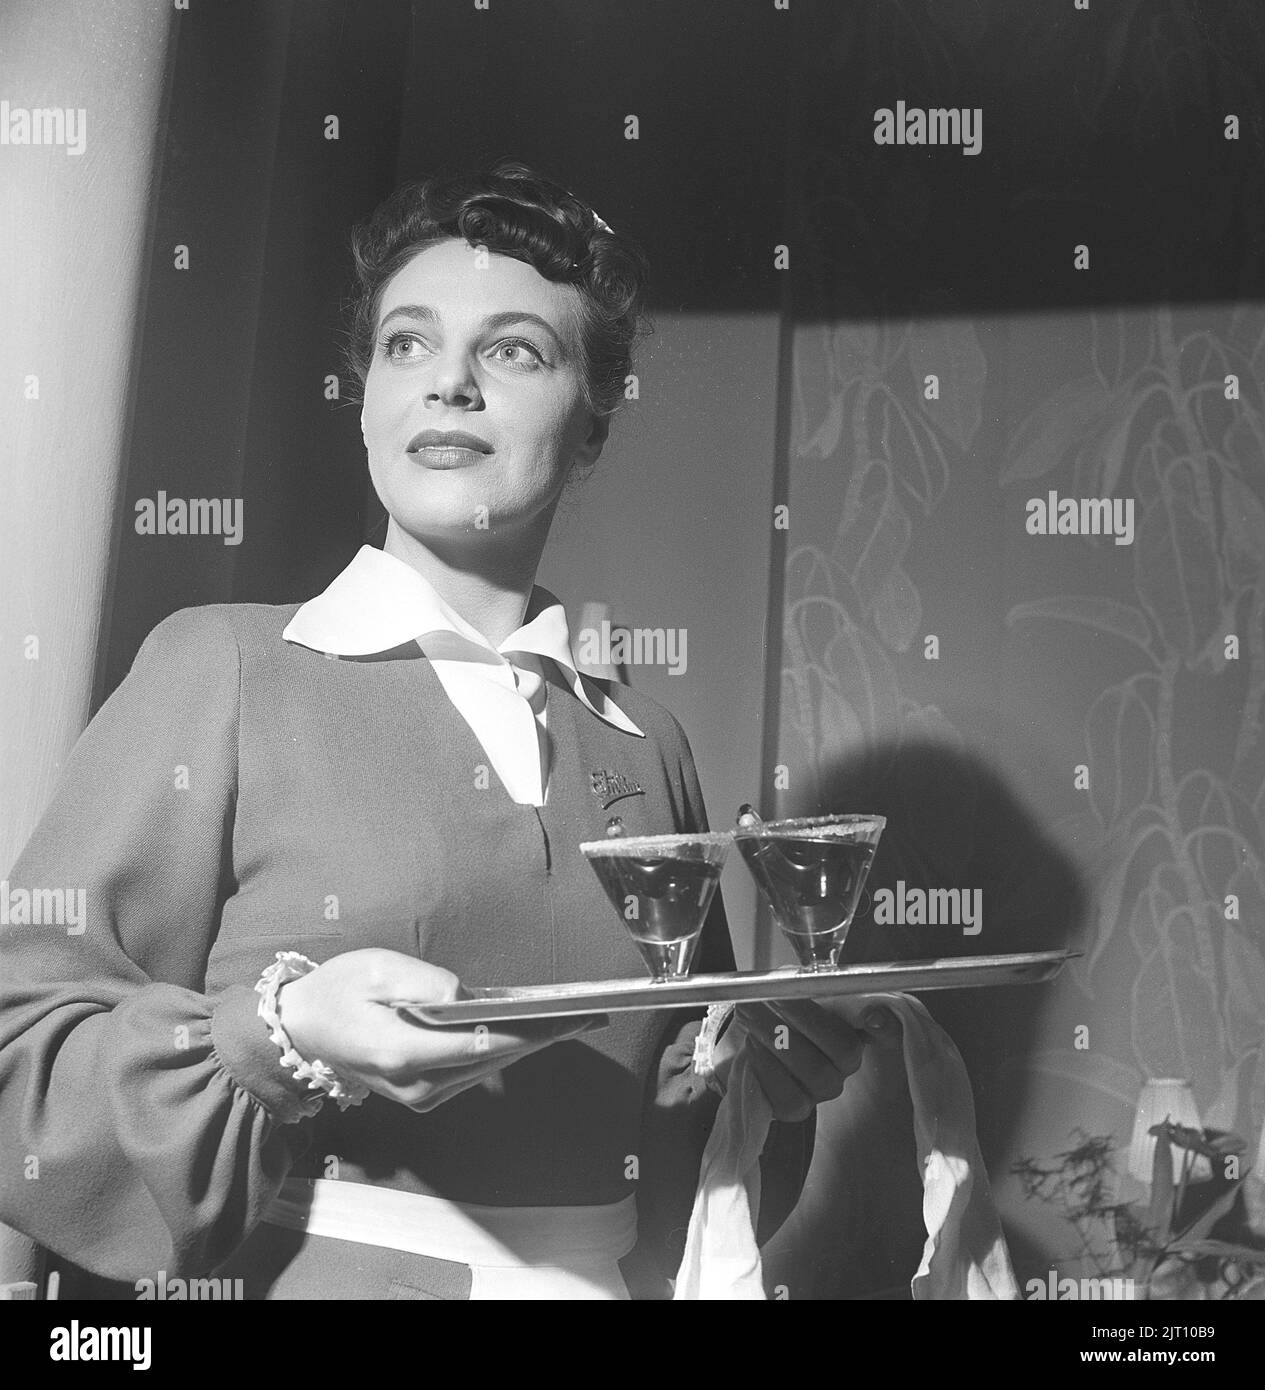 Service in the 1940s. A woman working as a waitress  in a restaurant, bar or hotel is standing ready with a tray with two drinks on it. She is nicely dressed and has beautiful hair. Sweden 1949 Kristoffersson ref AU111-2 Stock Photo